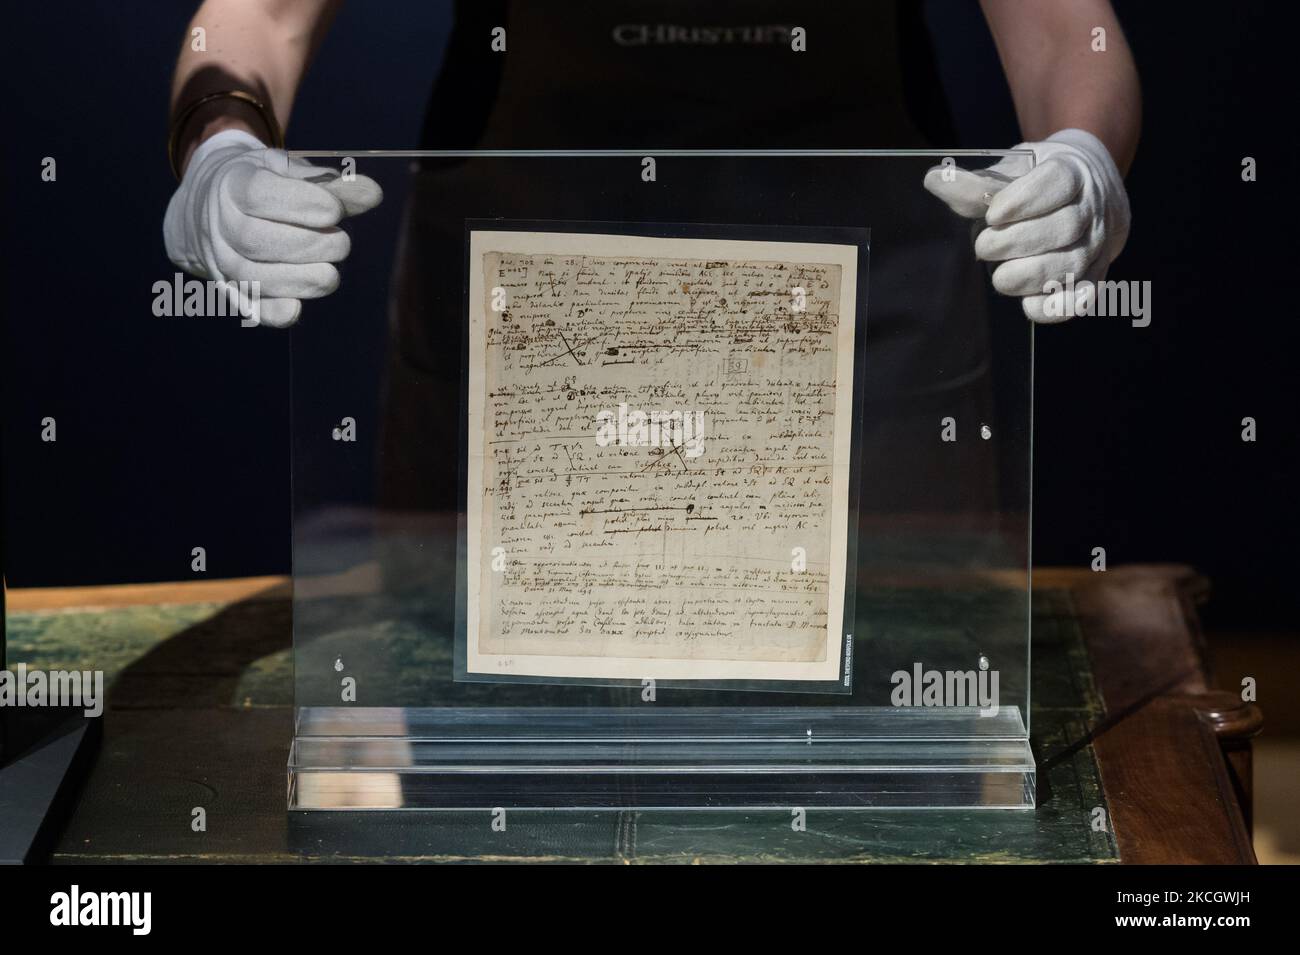 LONDON, UNITED KINGDOM - JULY 05, 2021: Isaac Newton’s 'Philosophiae naturalis principia mathematica' working manuscript for second edition, estimate £600,000-900,000 is displayed during a photo call for Classic Week at Christie's auction house, a marquee series of nine auctions which feature works of art from antiquity to the 20th century on July 05, 2021 in London, England. (Photo by WIktor Szymanowicz/NurPhoto) Stock Photo